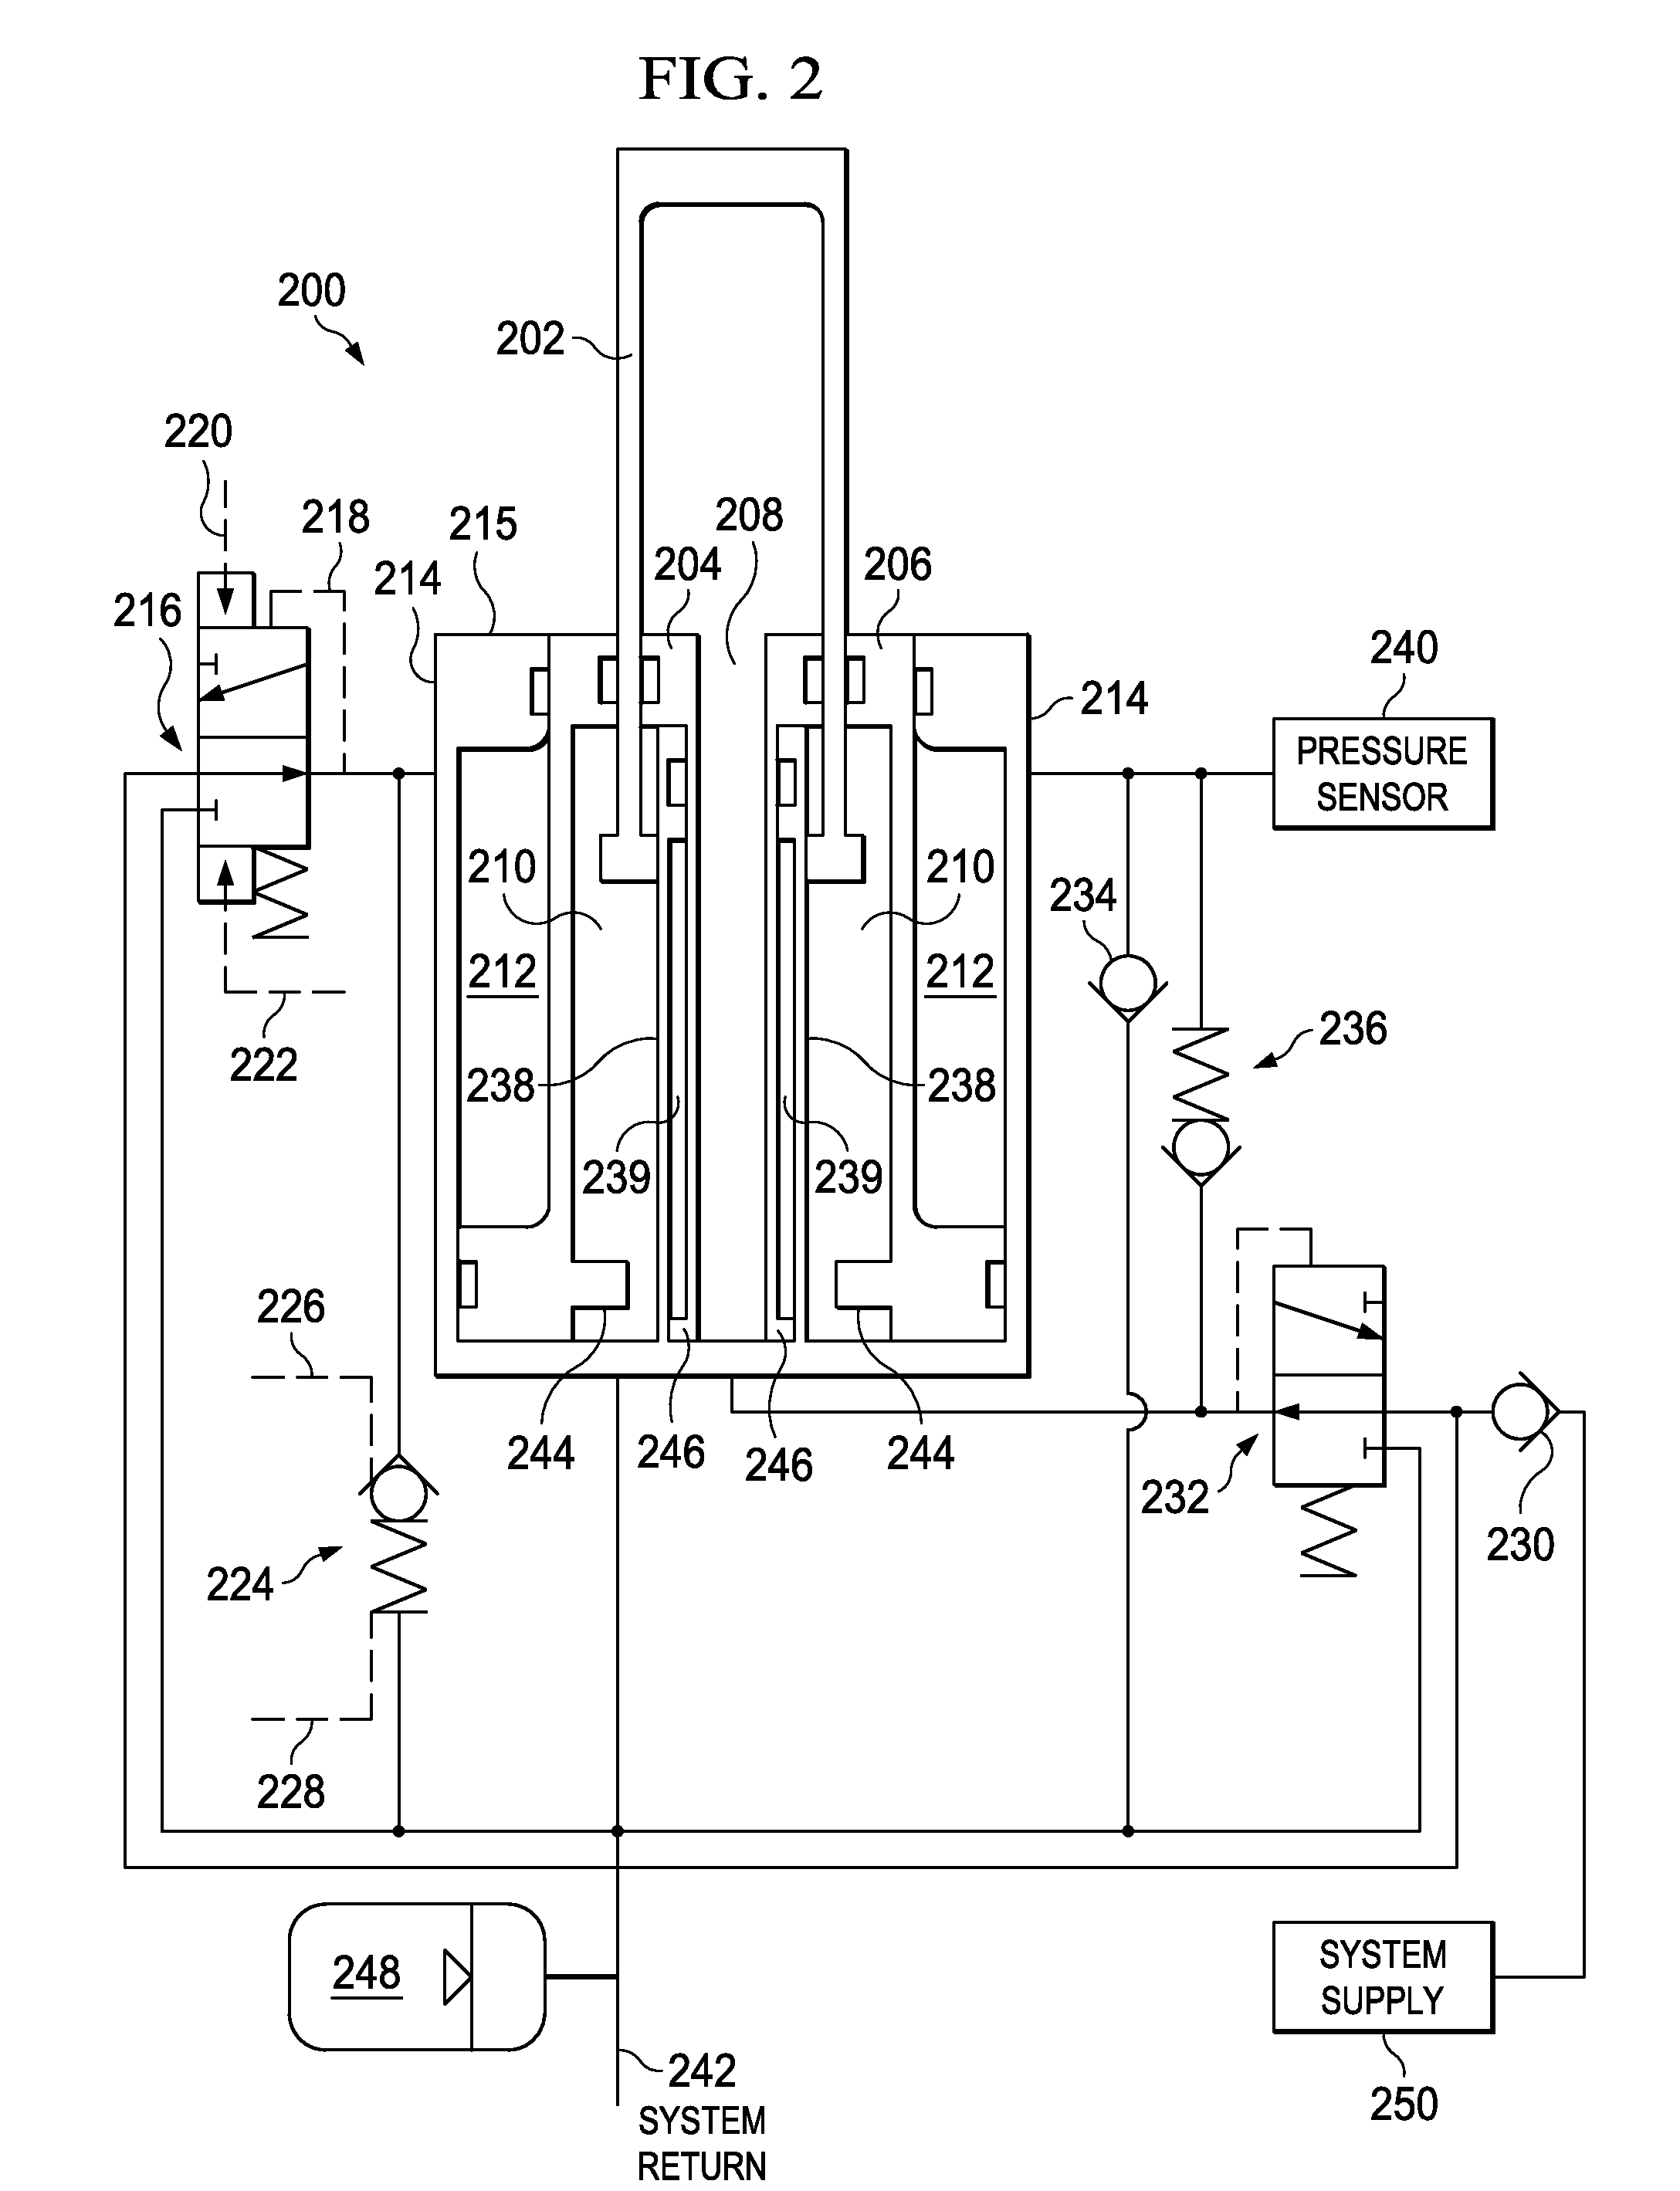 Hydraulic actuator for semi levered landing gear